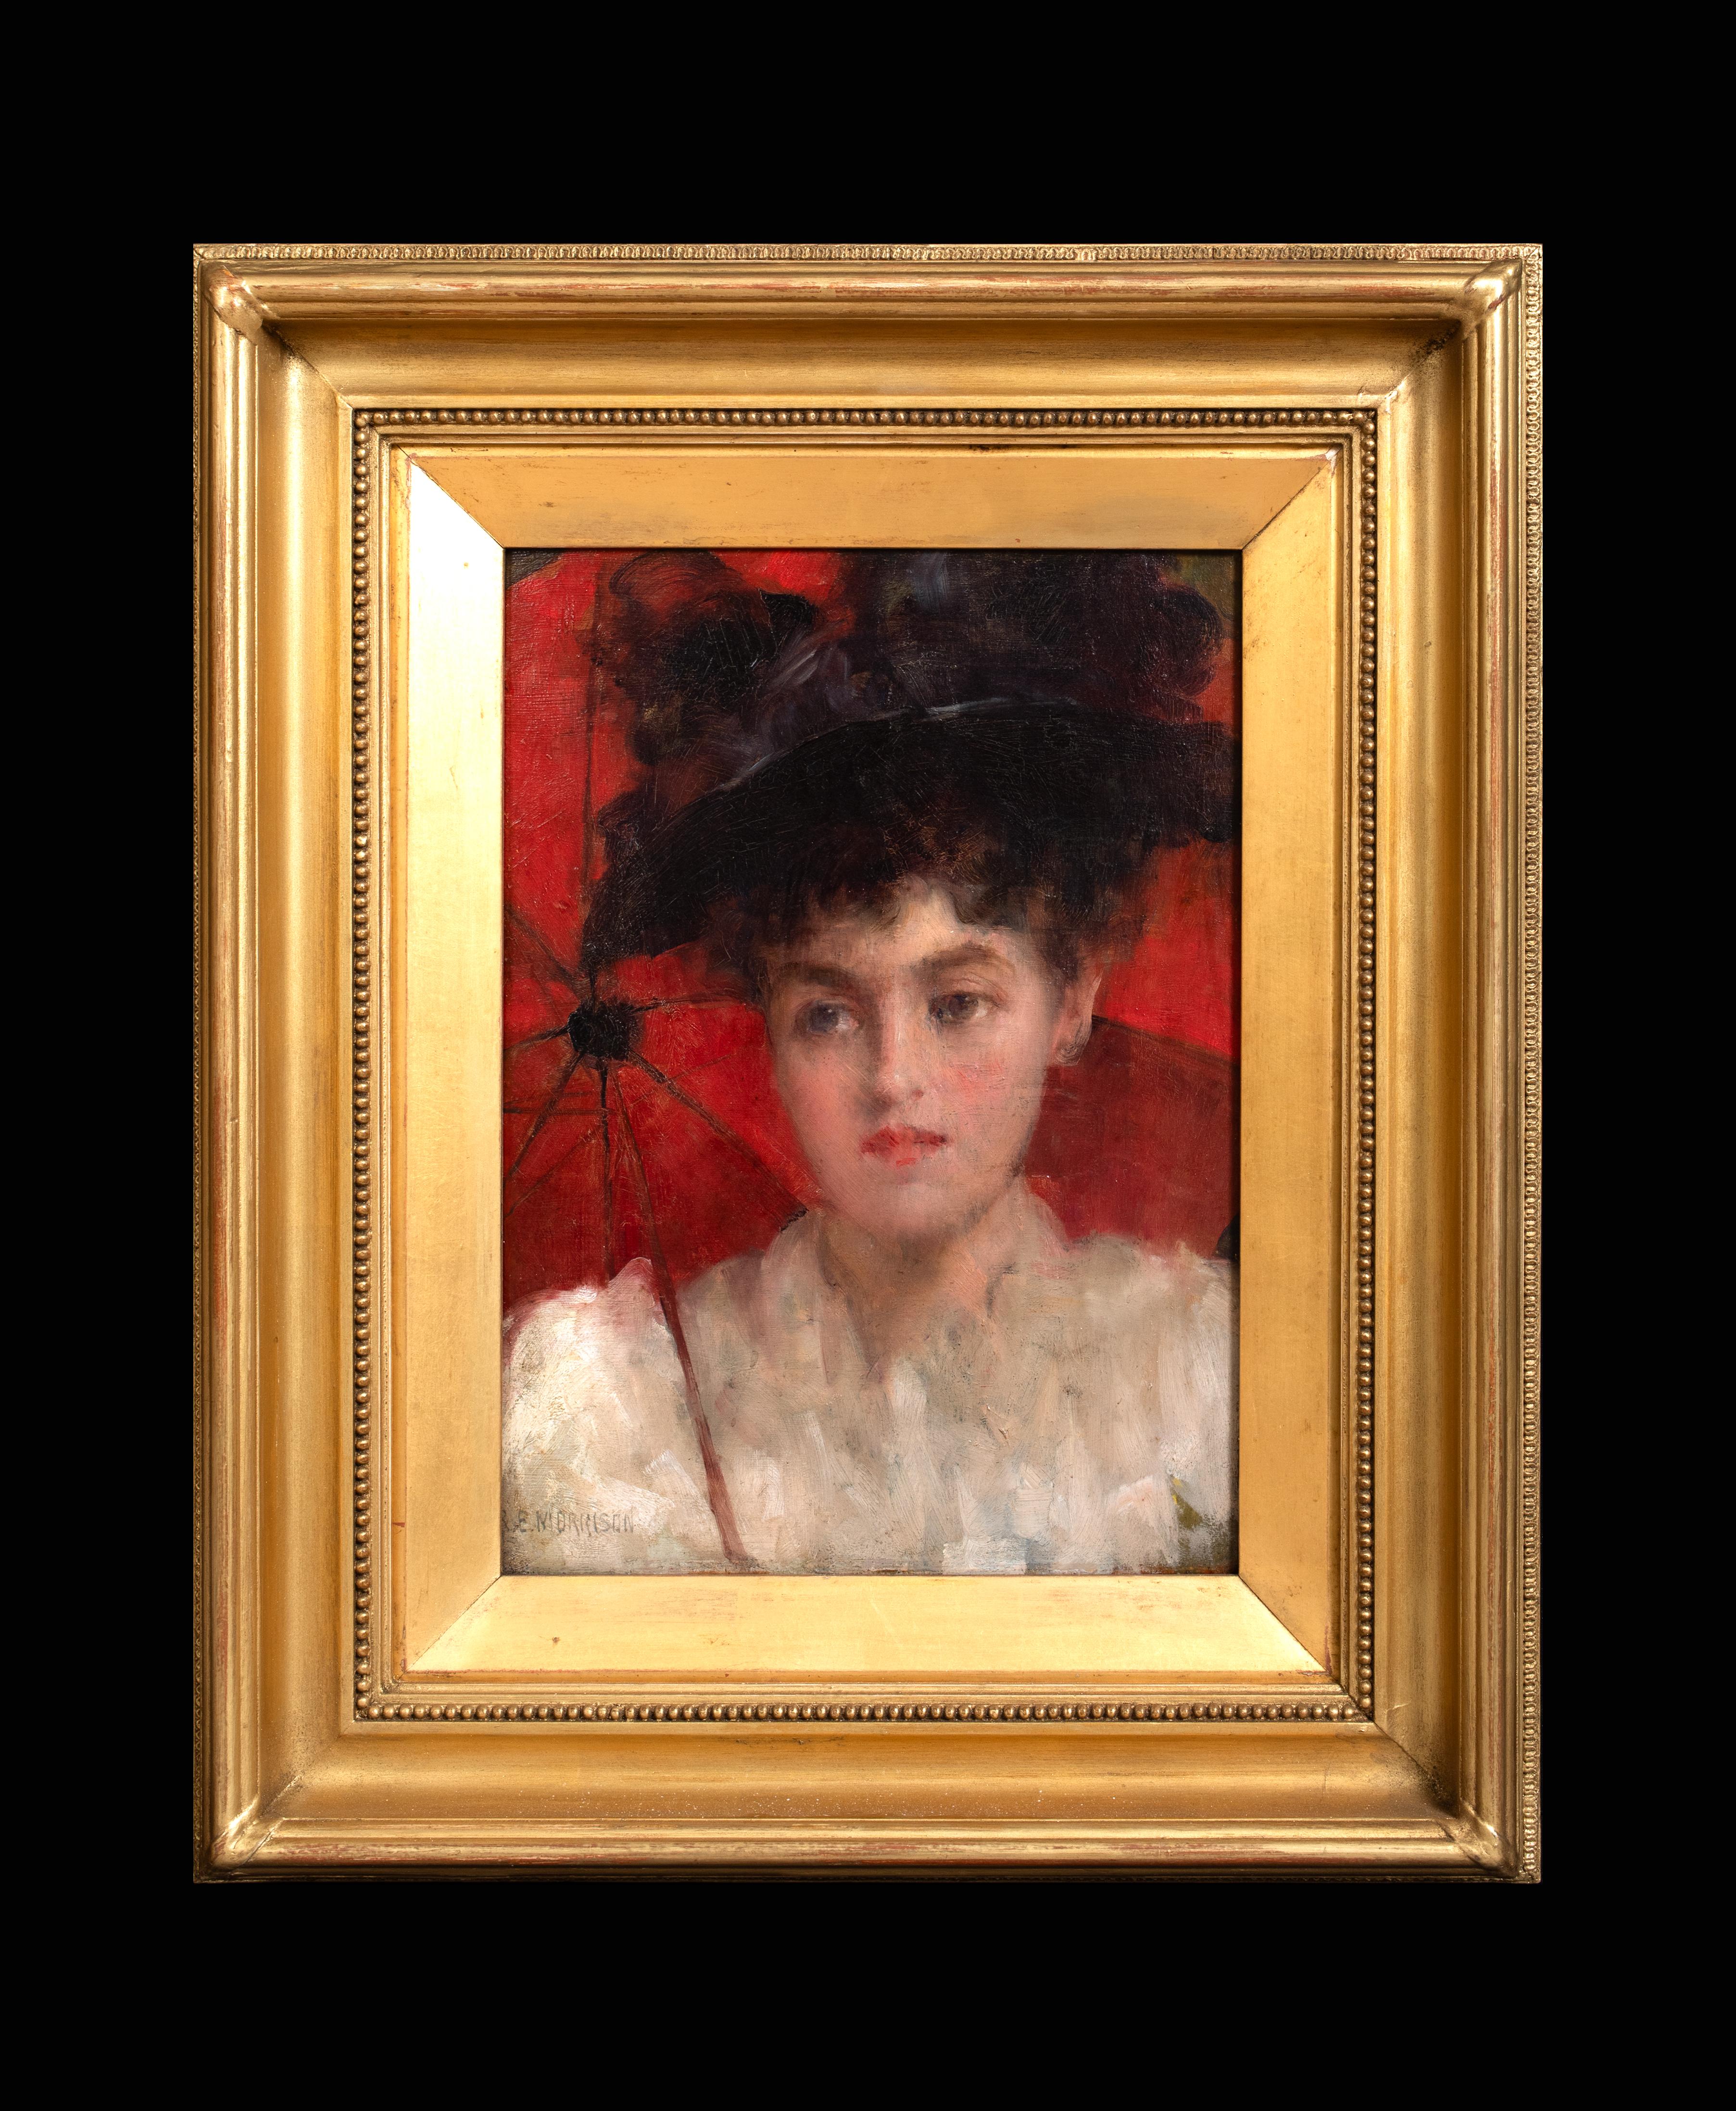 Portrait Of A Lady With A Red Parasol, circa 1900  by Robert Edward MORRISON  - Painting by Robert Edward Morrison